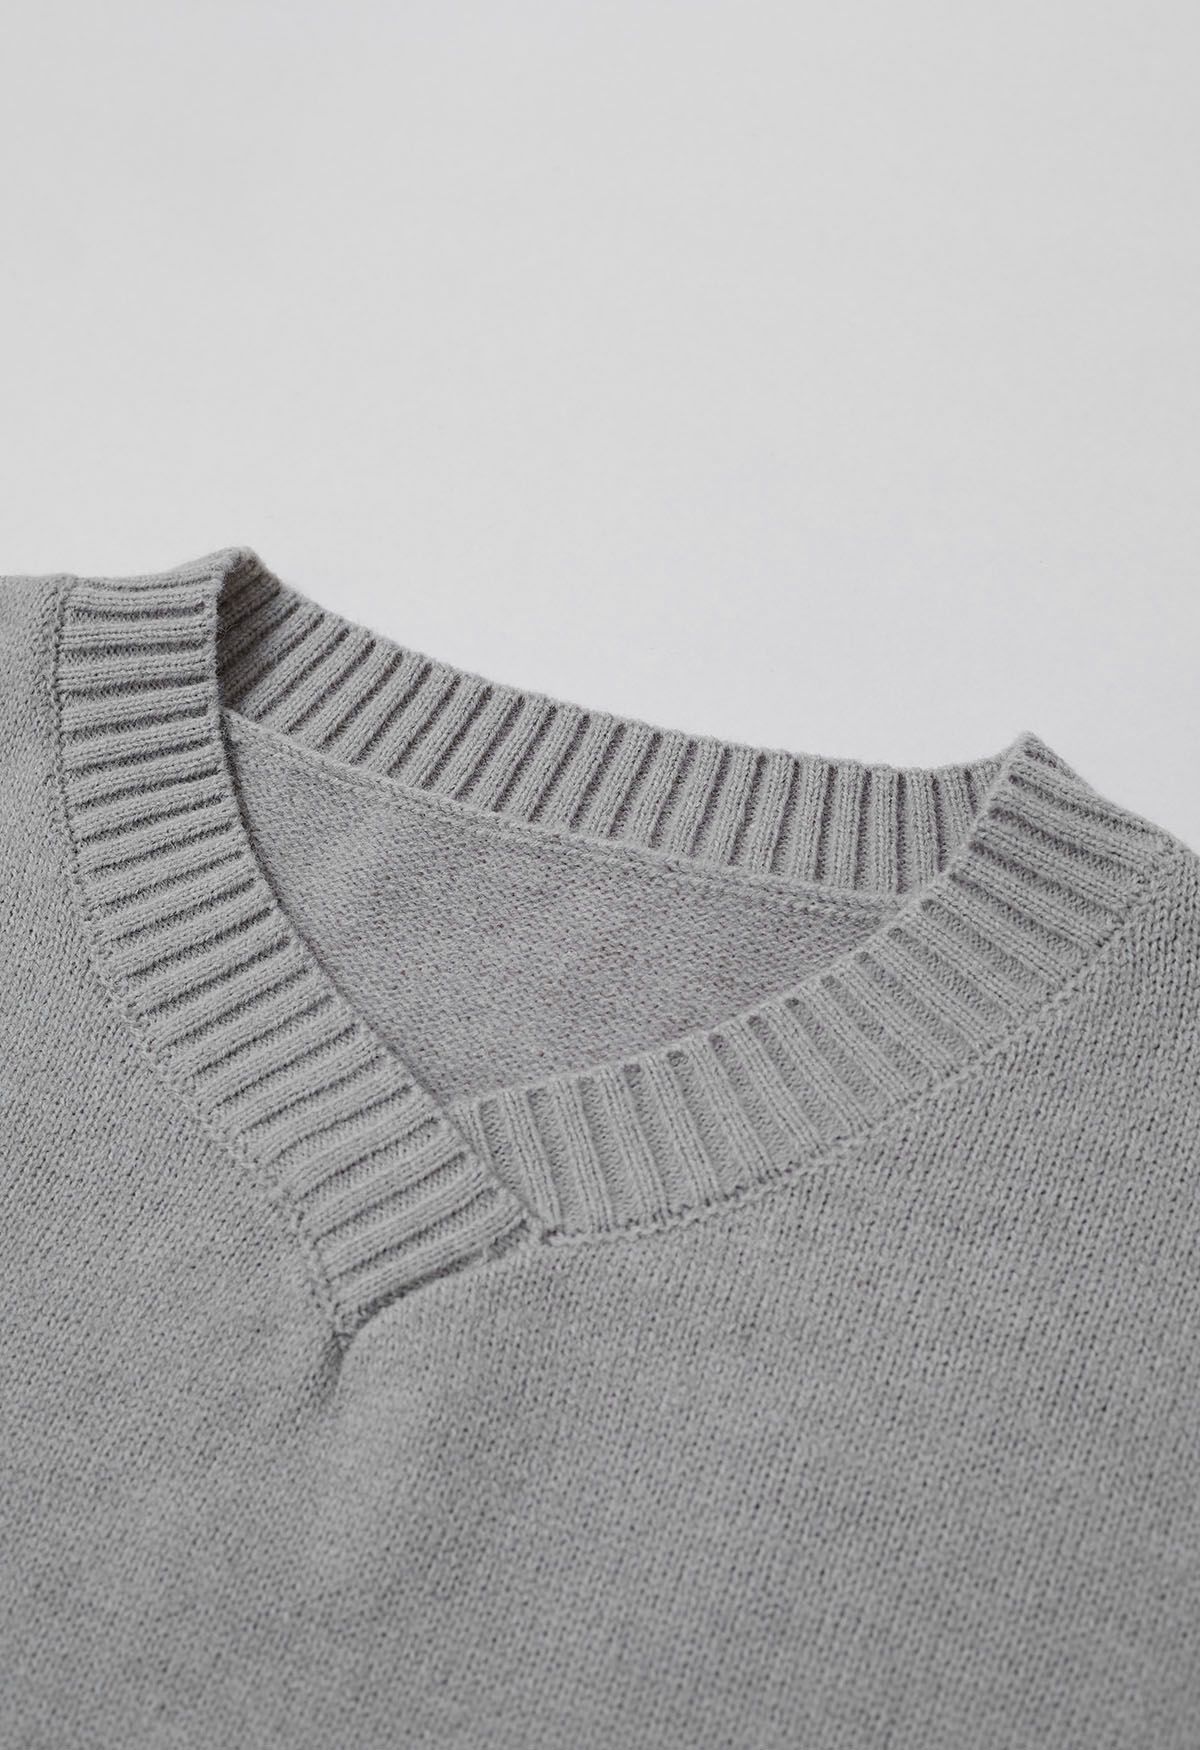 Dropped Shoulder Side Slit Slouchy Knit Sweater in Grey - Retro, Indie ...